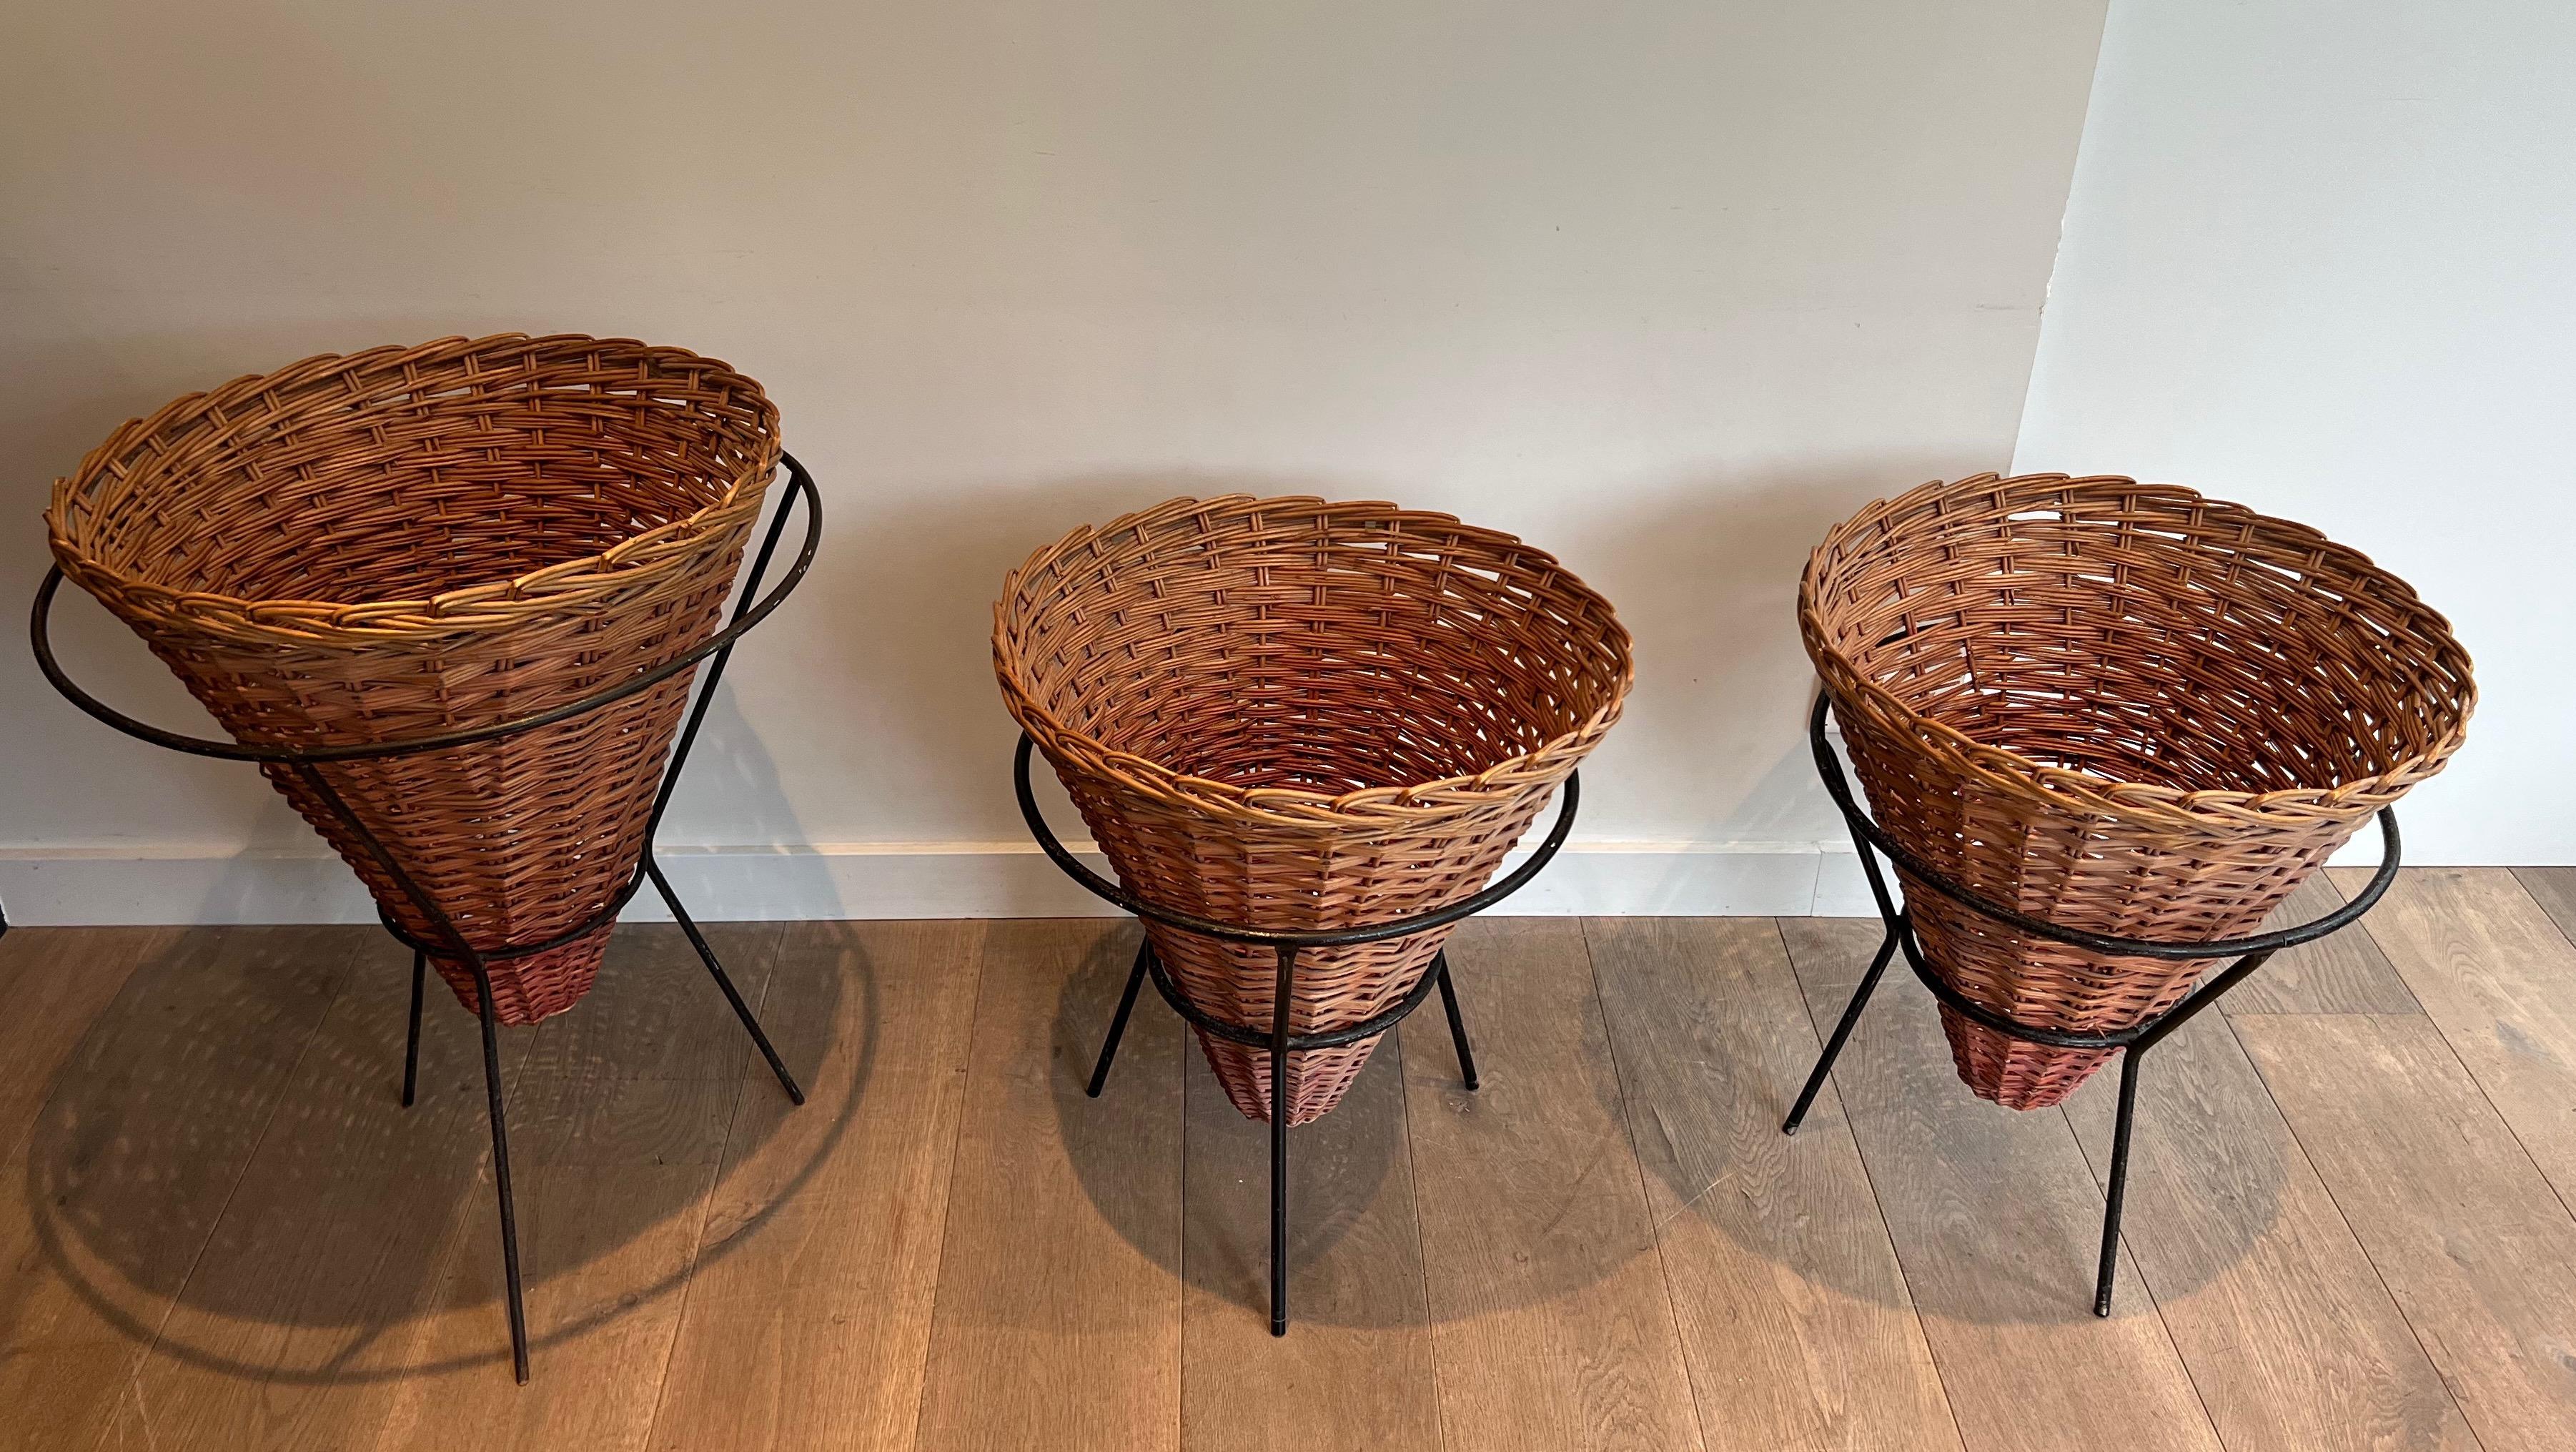 This decorative set of three planters is made of rattan conic planters slide into black lacquered metal bases. This is a French work, circa 1950.